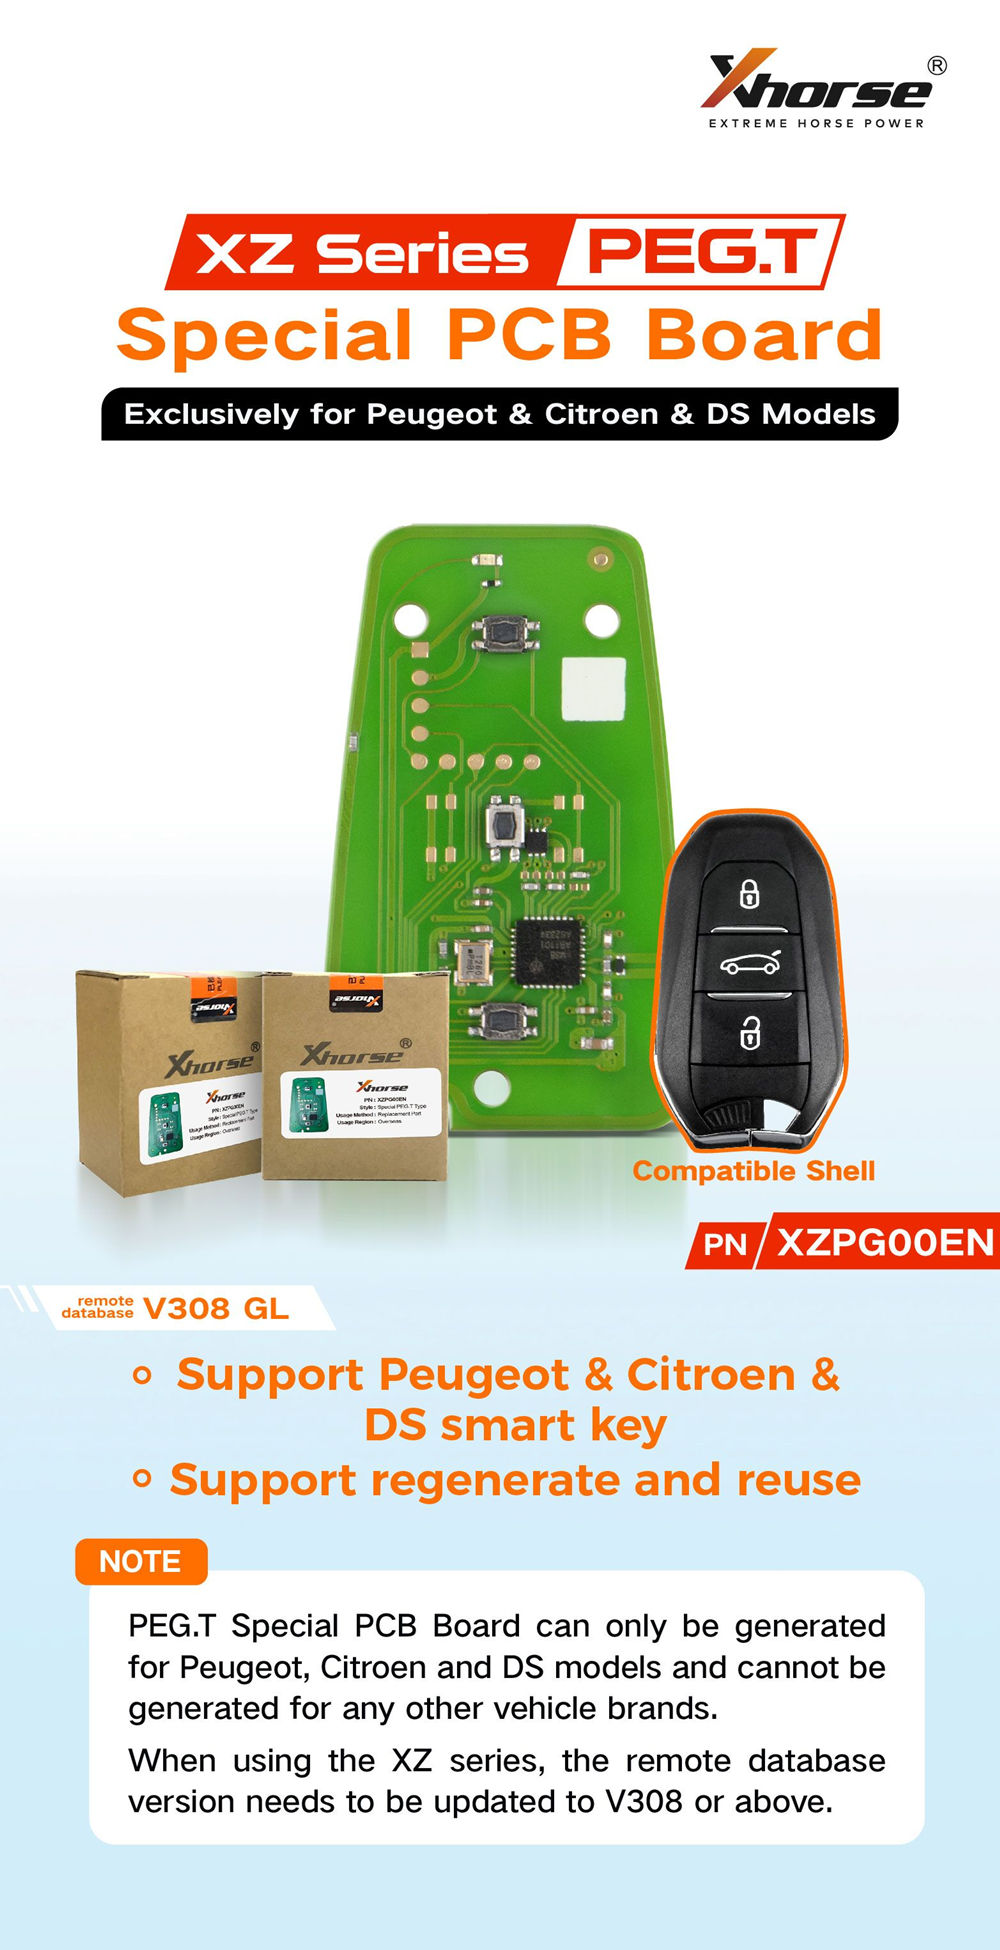 XHORSE XZPG00EN Special PCB Board Exclusively for Peugeot & Citroen & DS Models